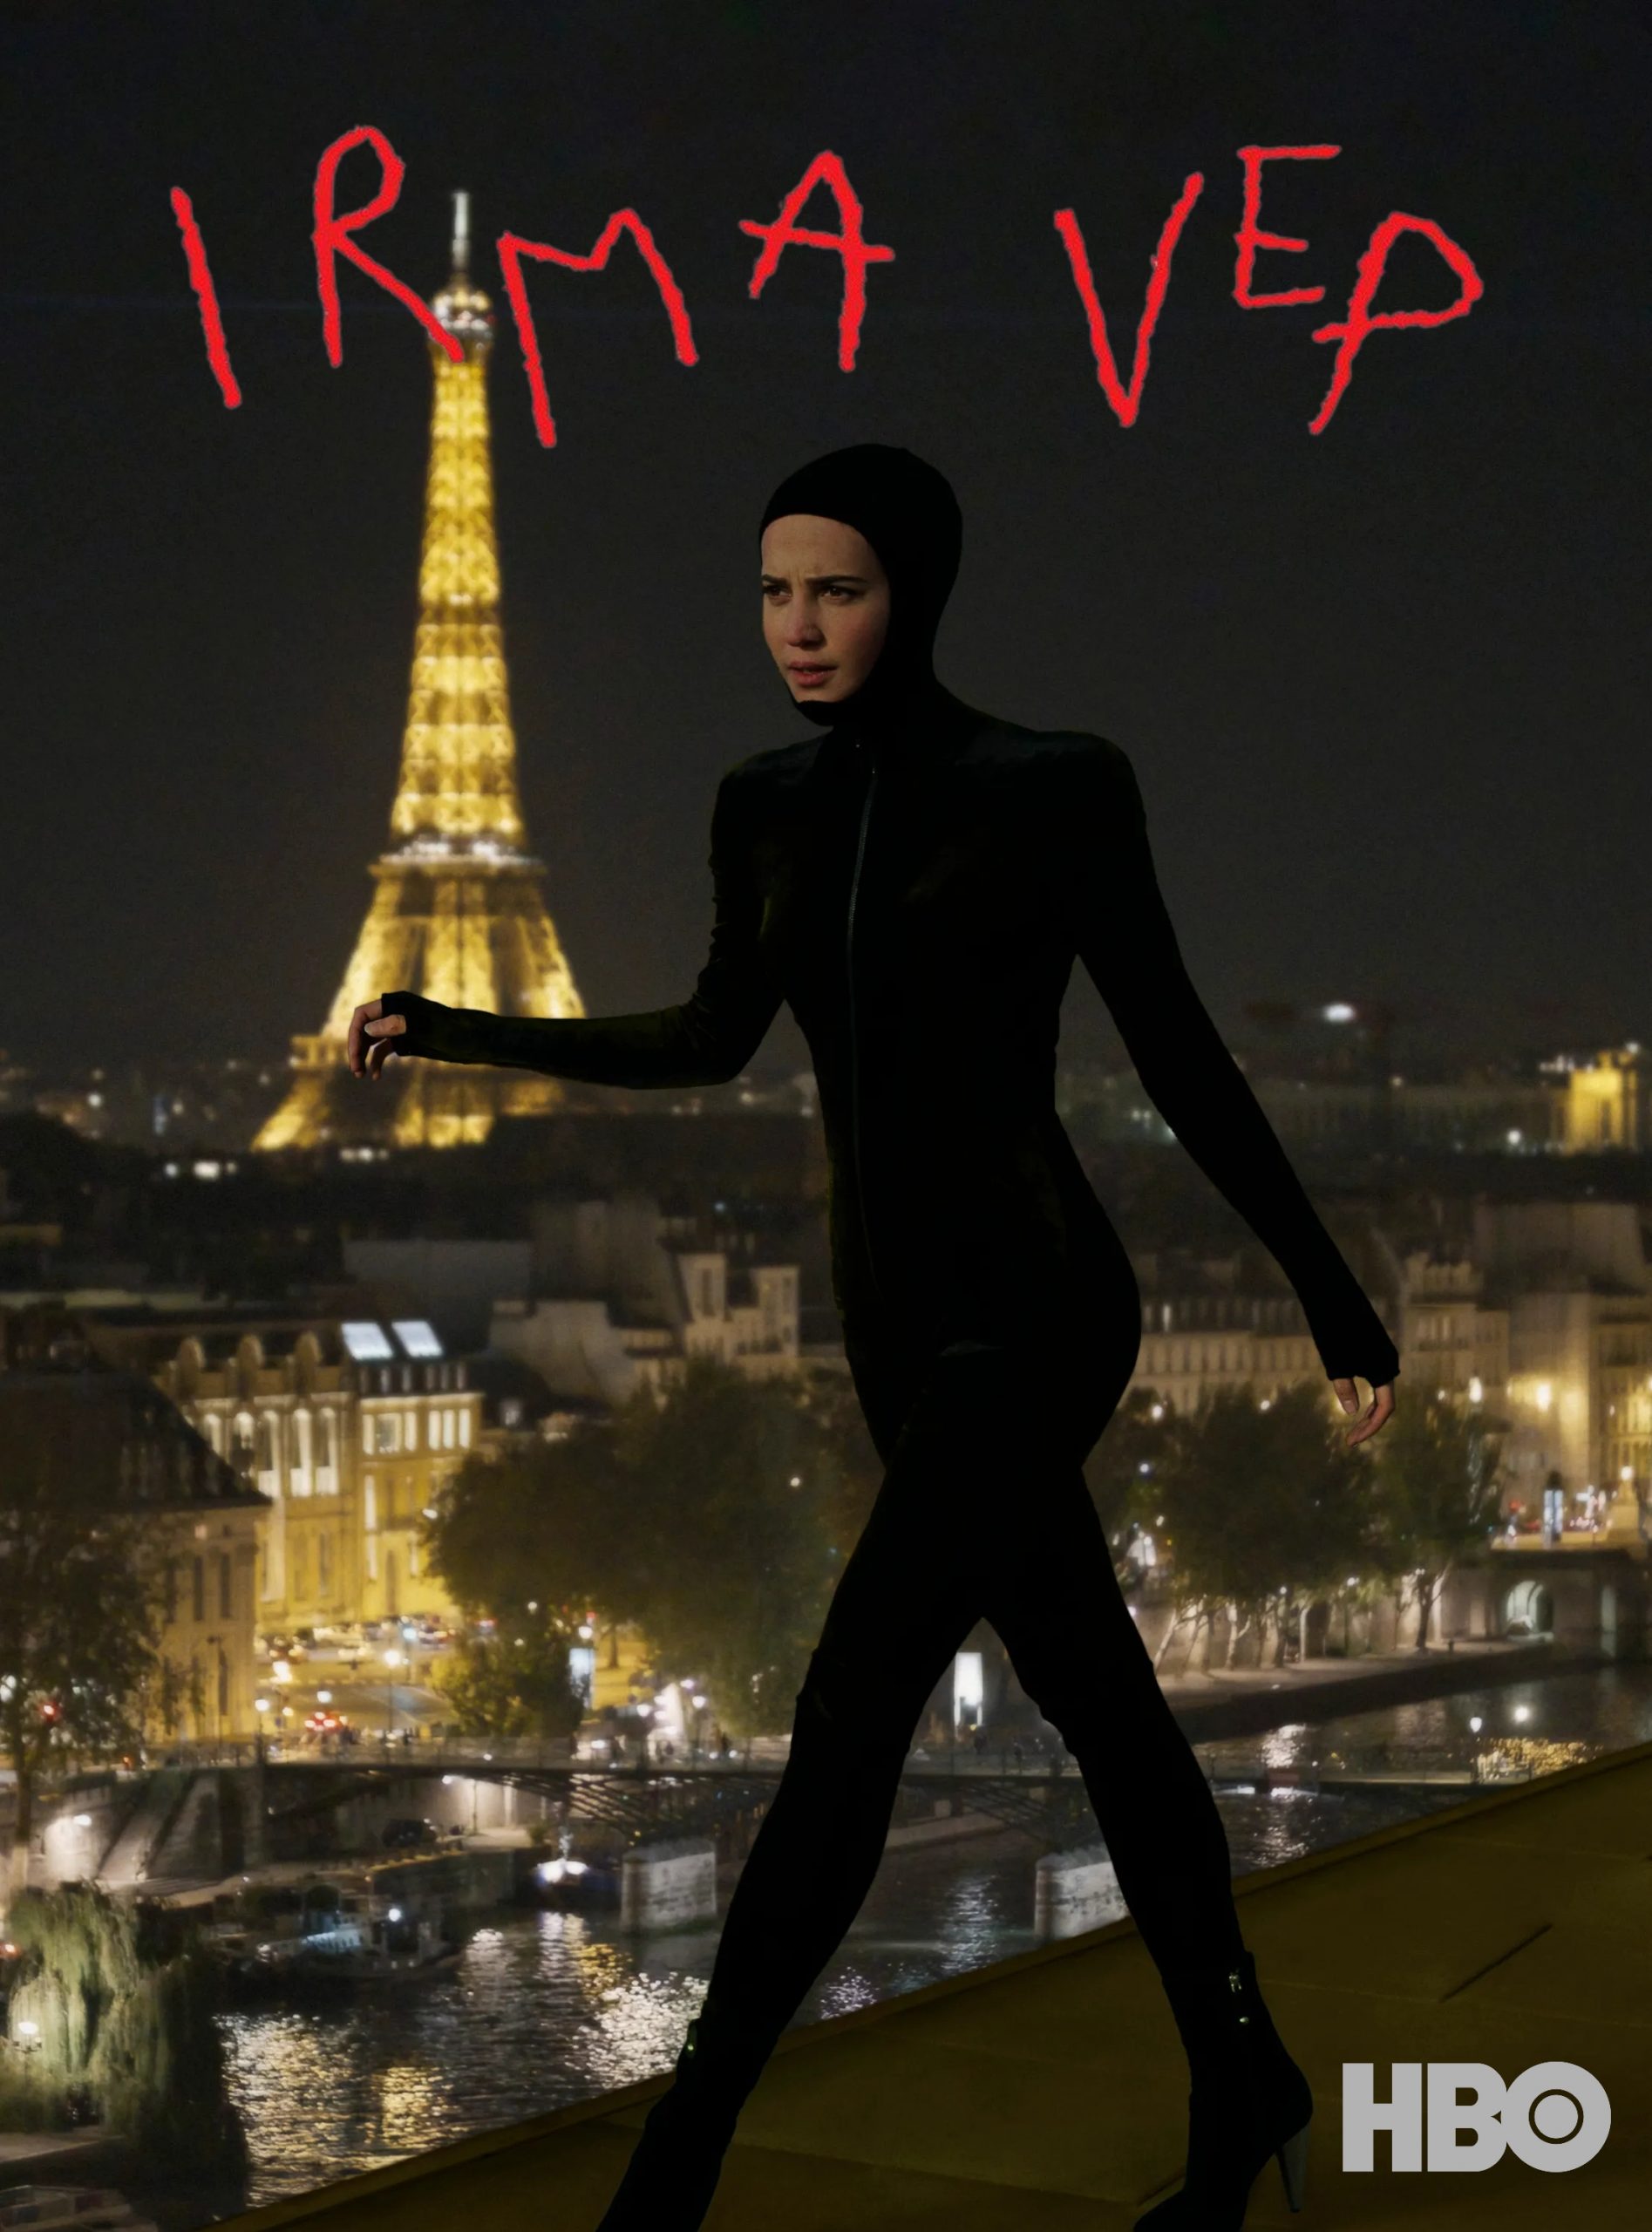 Is “Irma Vep Limited Series” on HBO Max